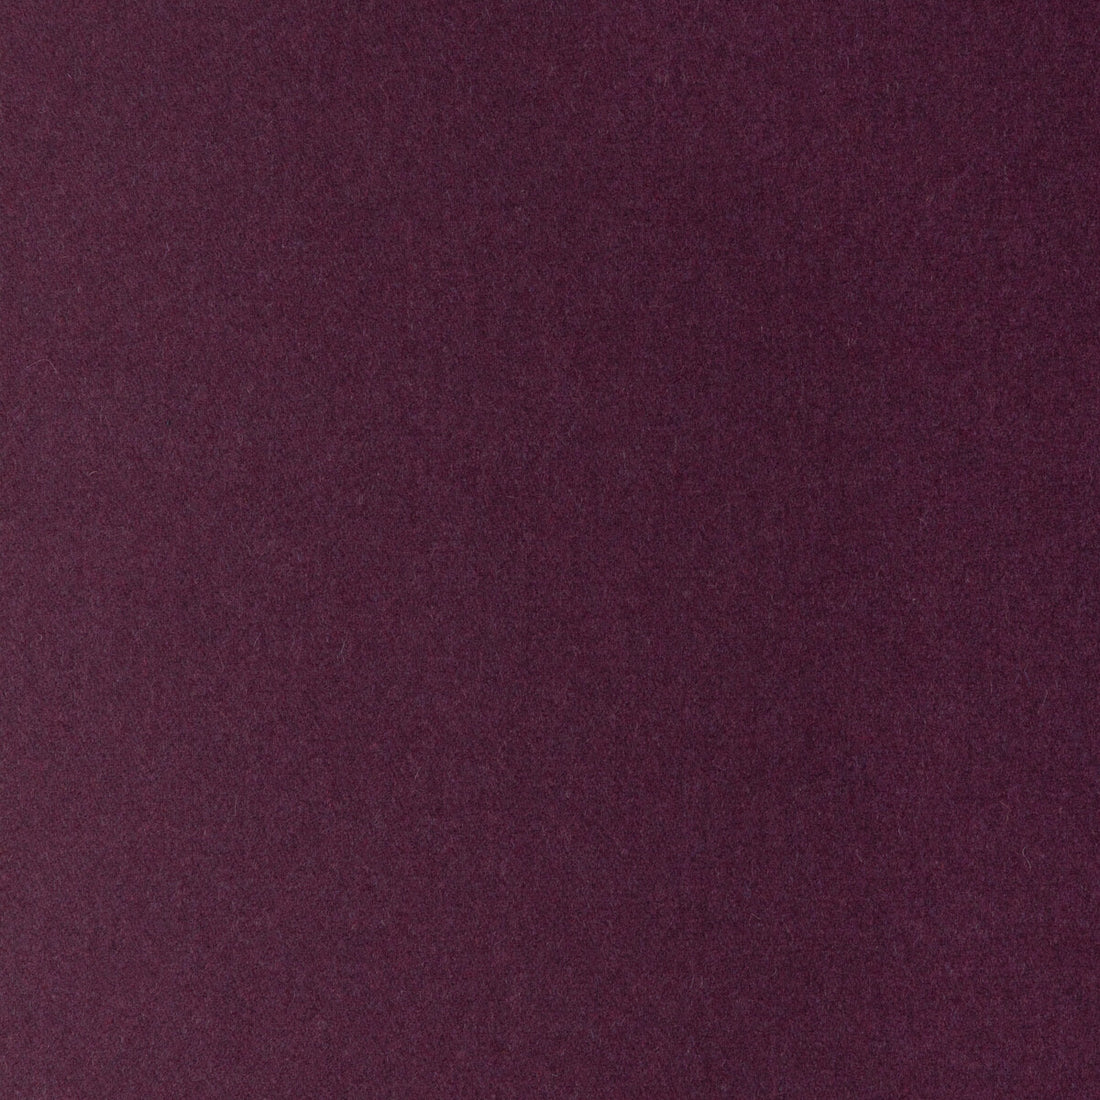 Jefferson Wool fabric in aubergine color - pattern 34397.1010.0 - by Kravet Contract